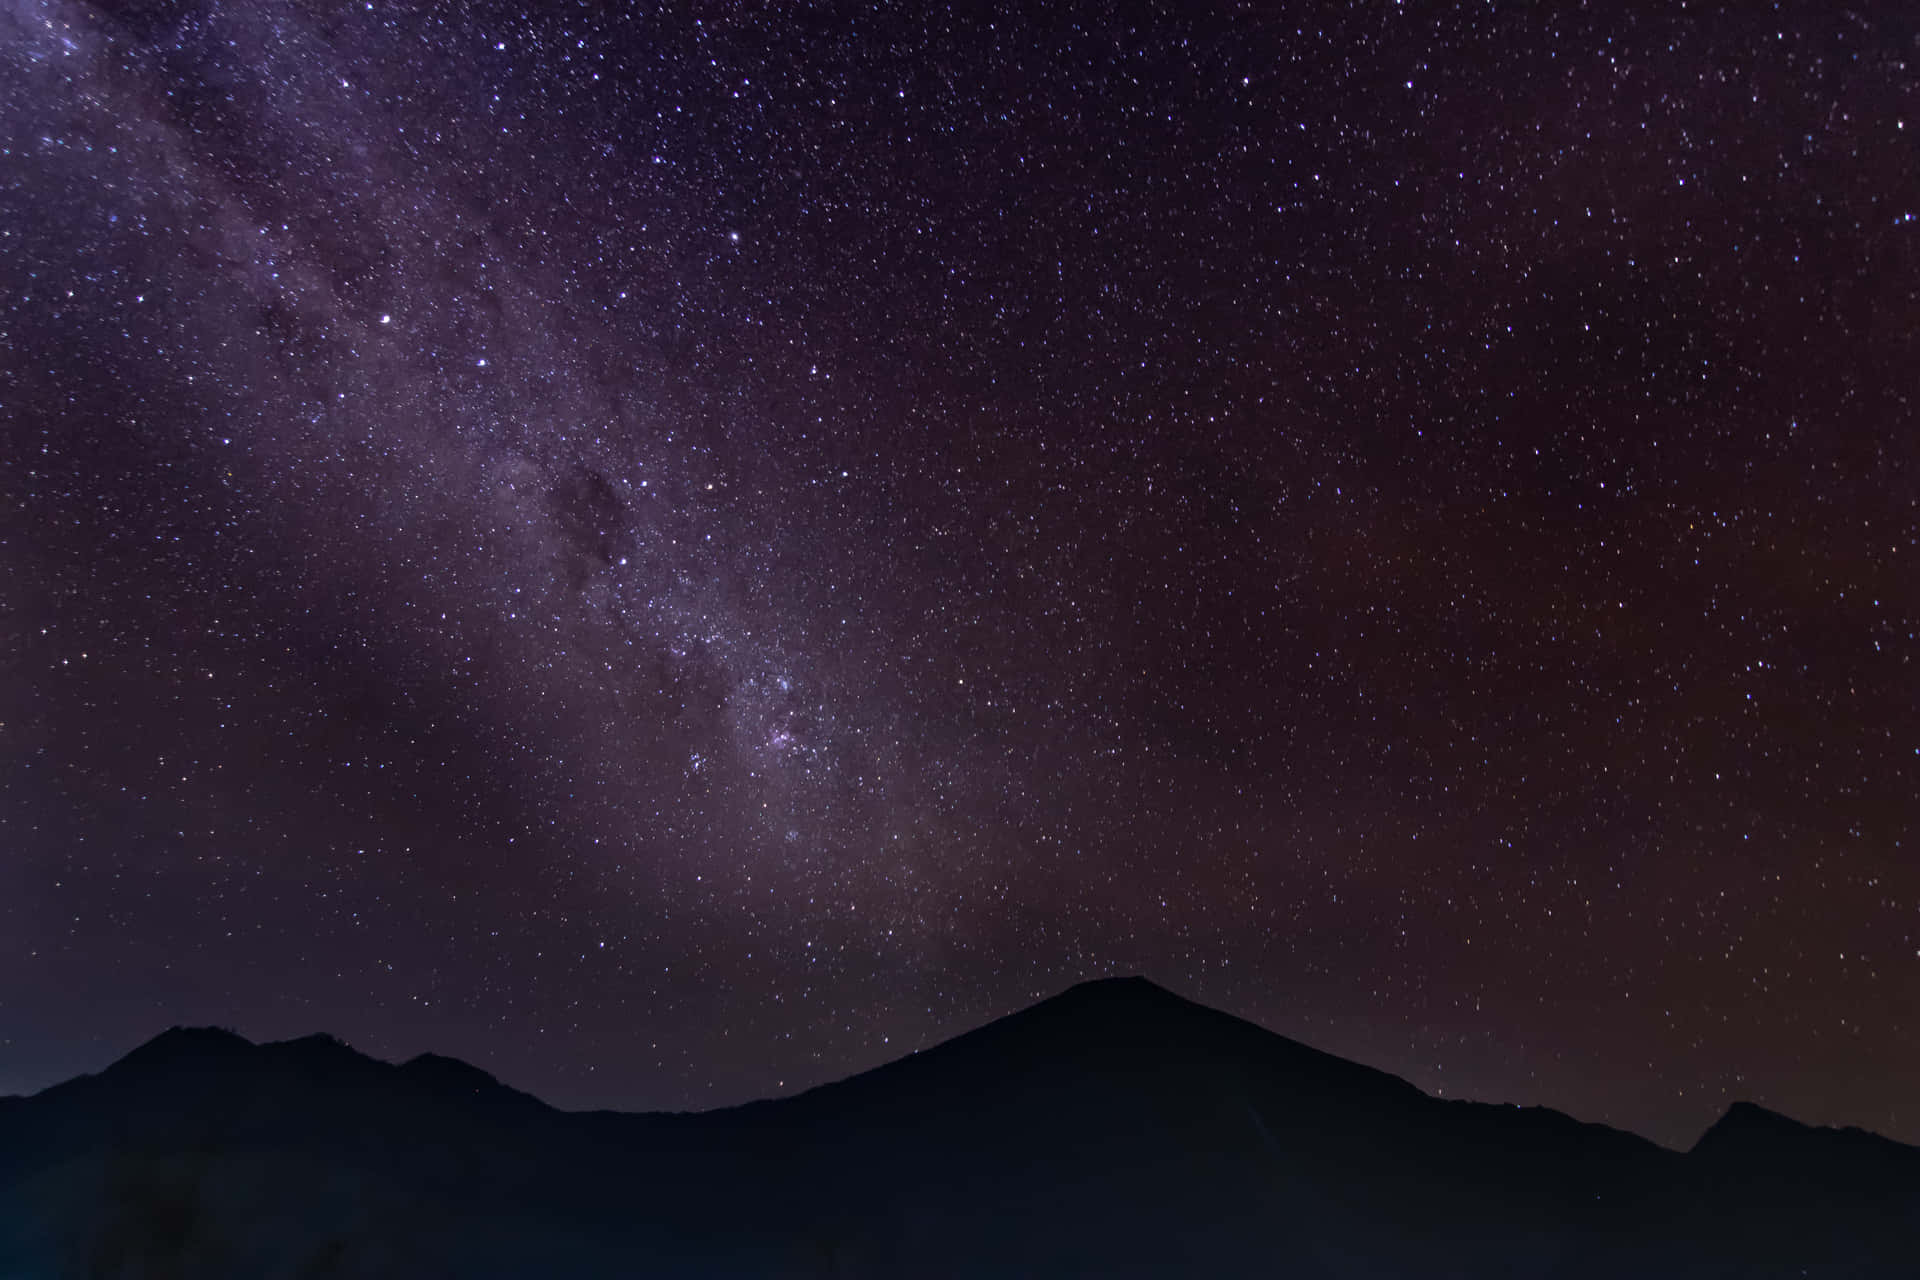 "Gaze Up at the Starry Sky and Wonder About the Unfathomable" Wallpaper